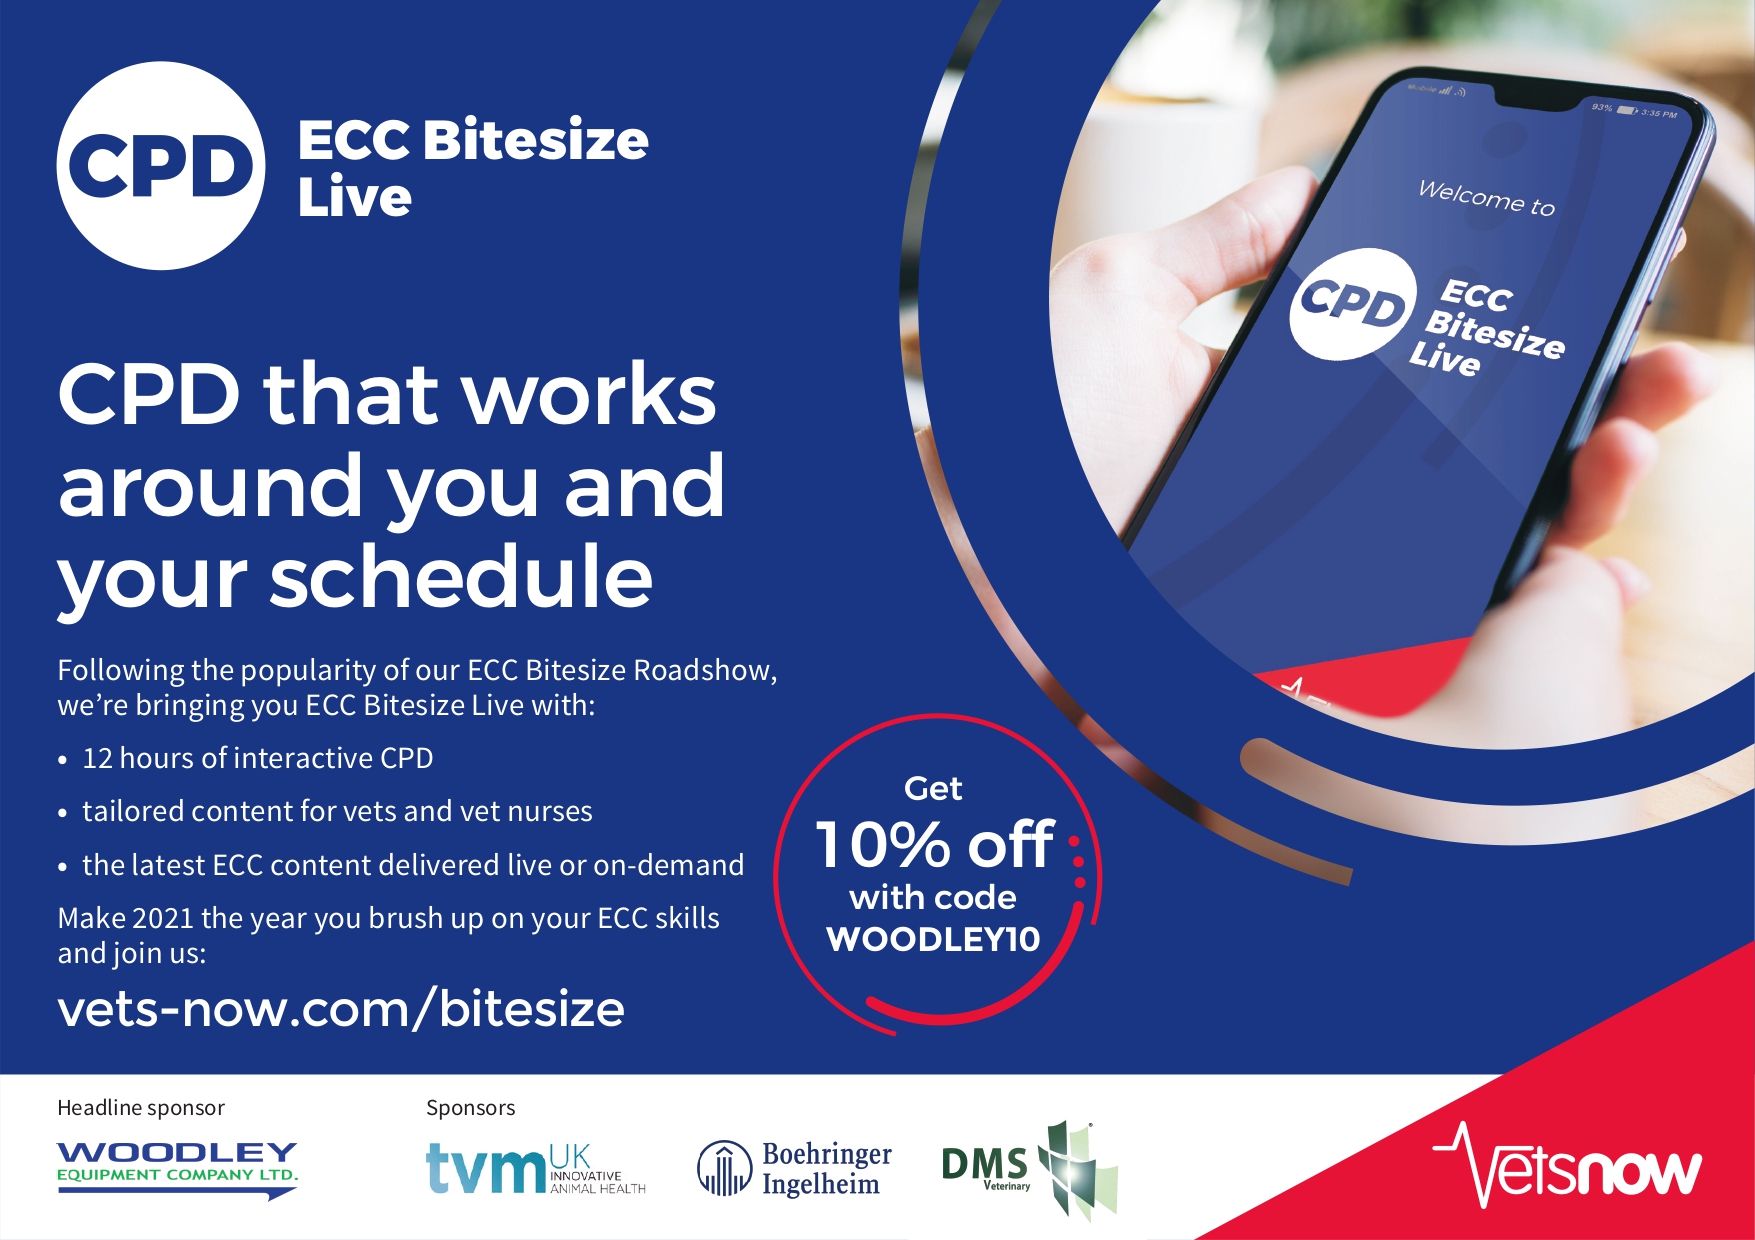 Woodley are proud to be the headline sponsor of Vets Now ECC Bitesize Live CPD